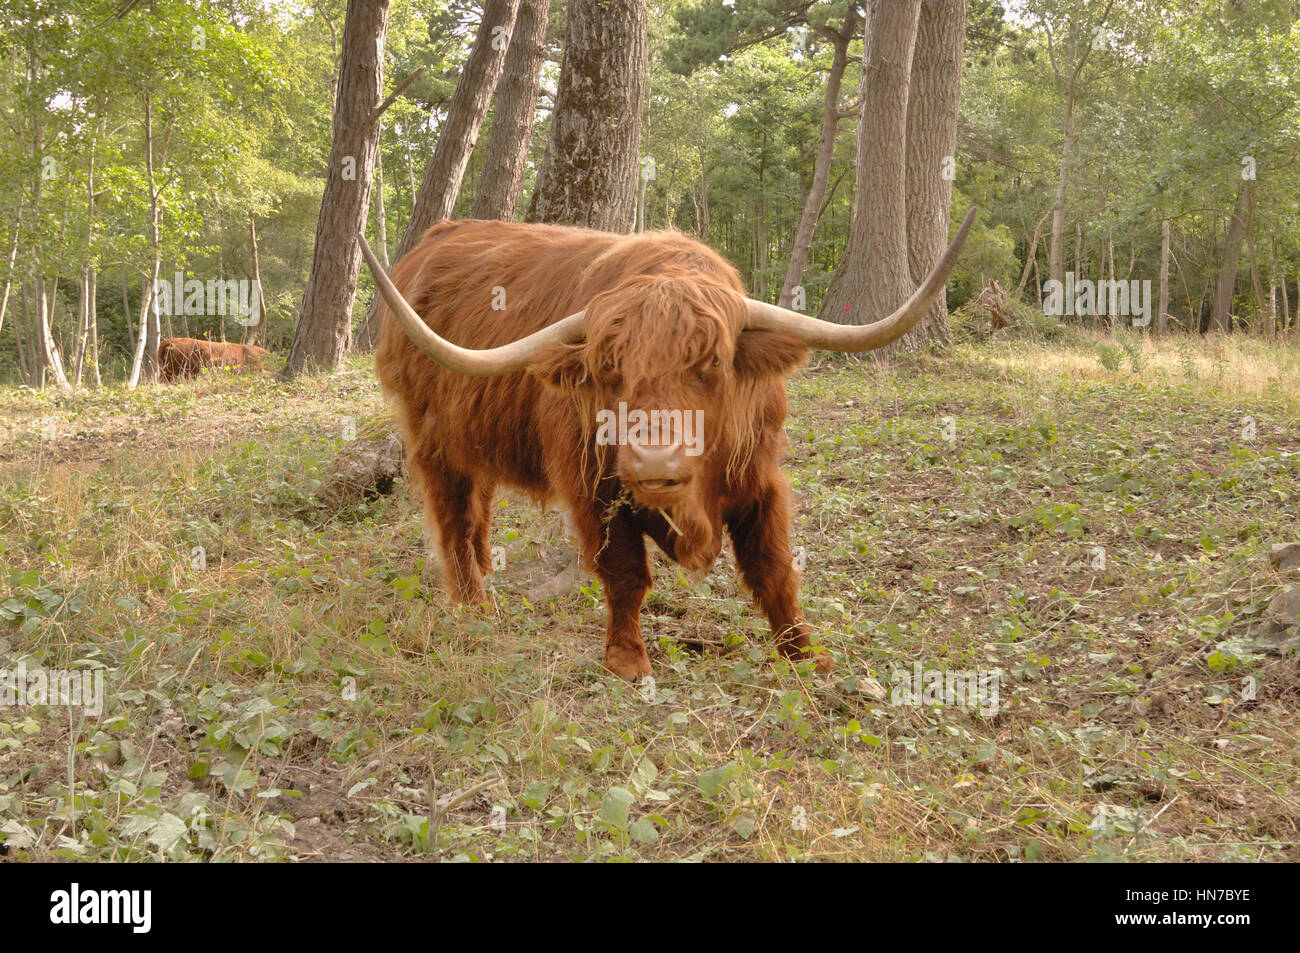 HIghland Cattle Bos taurus Photographed in nature reserve, France Stock Photo